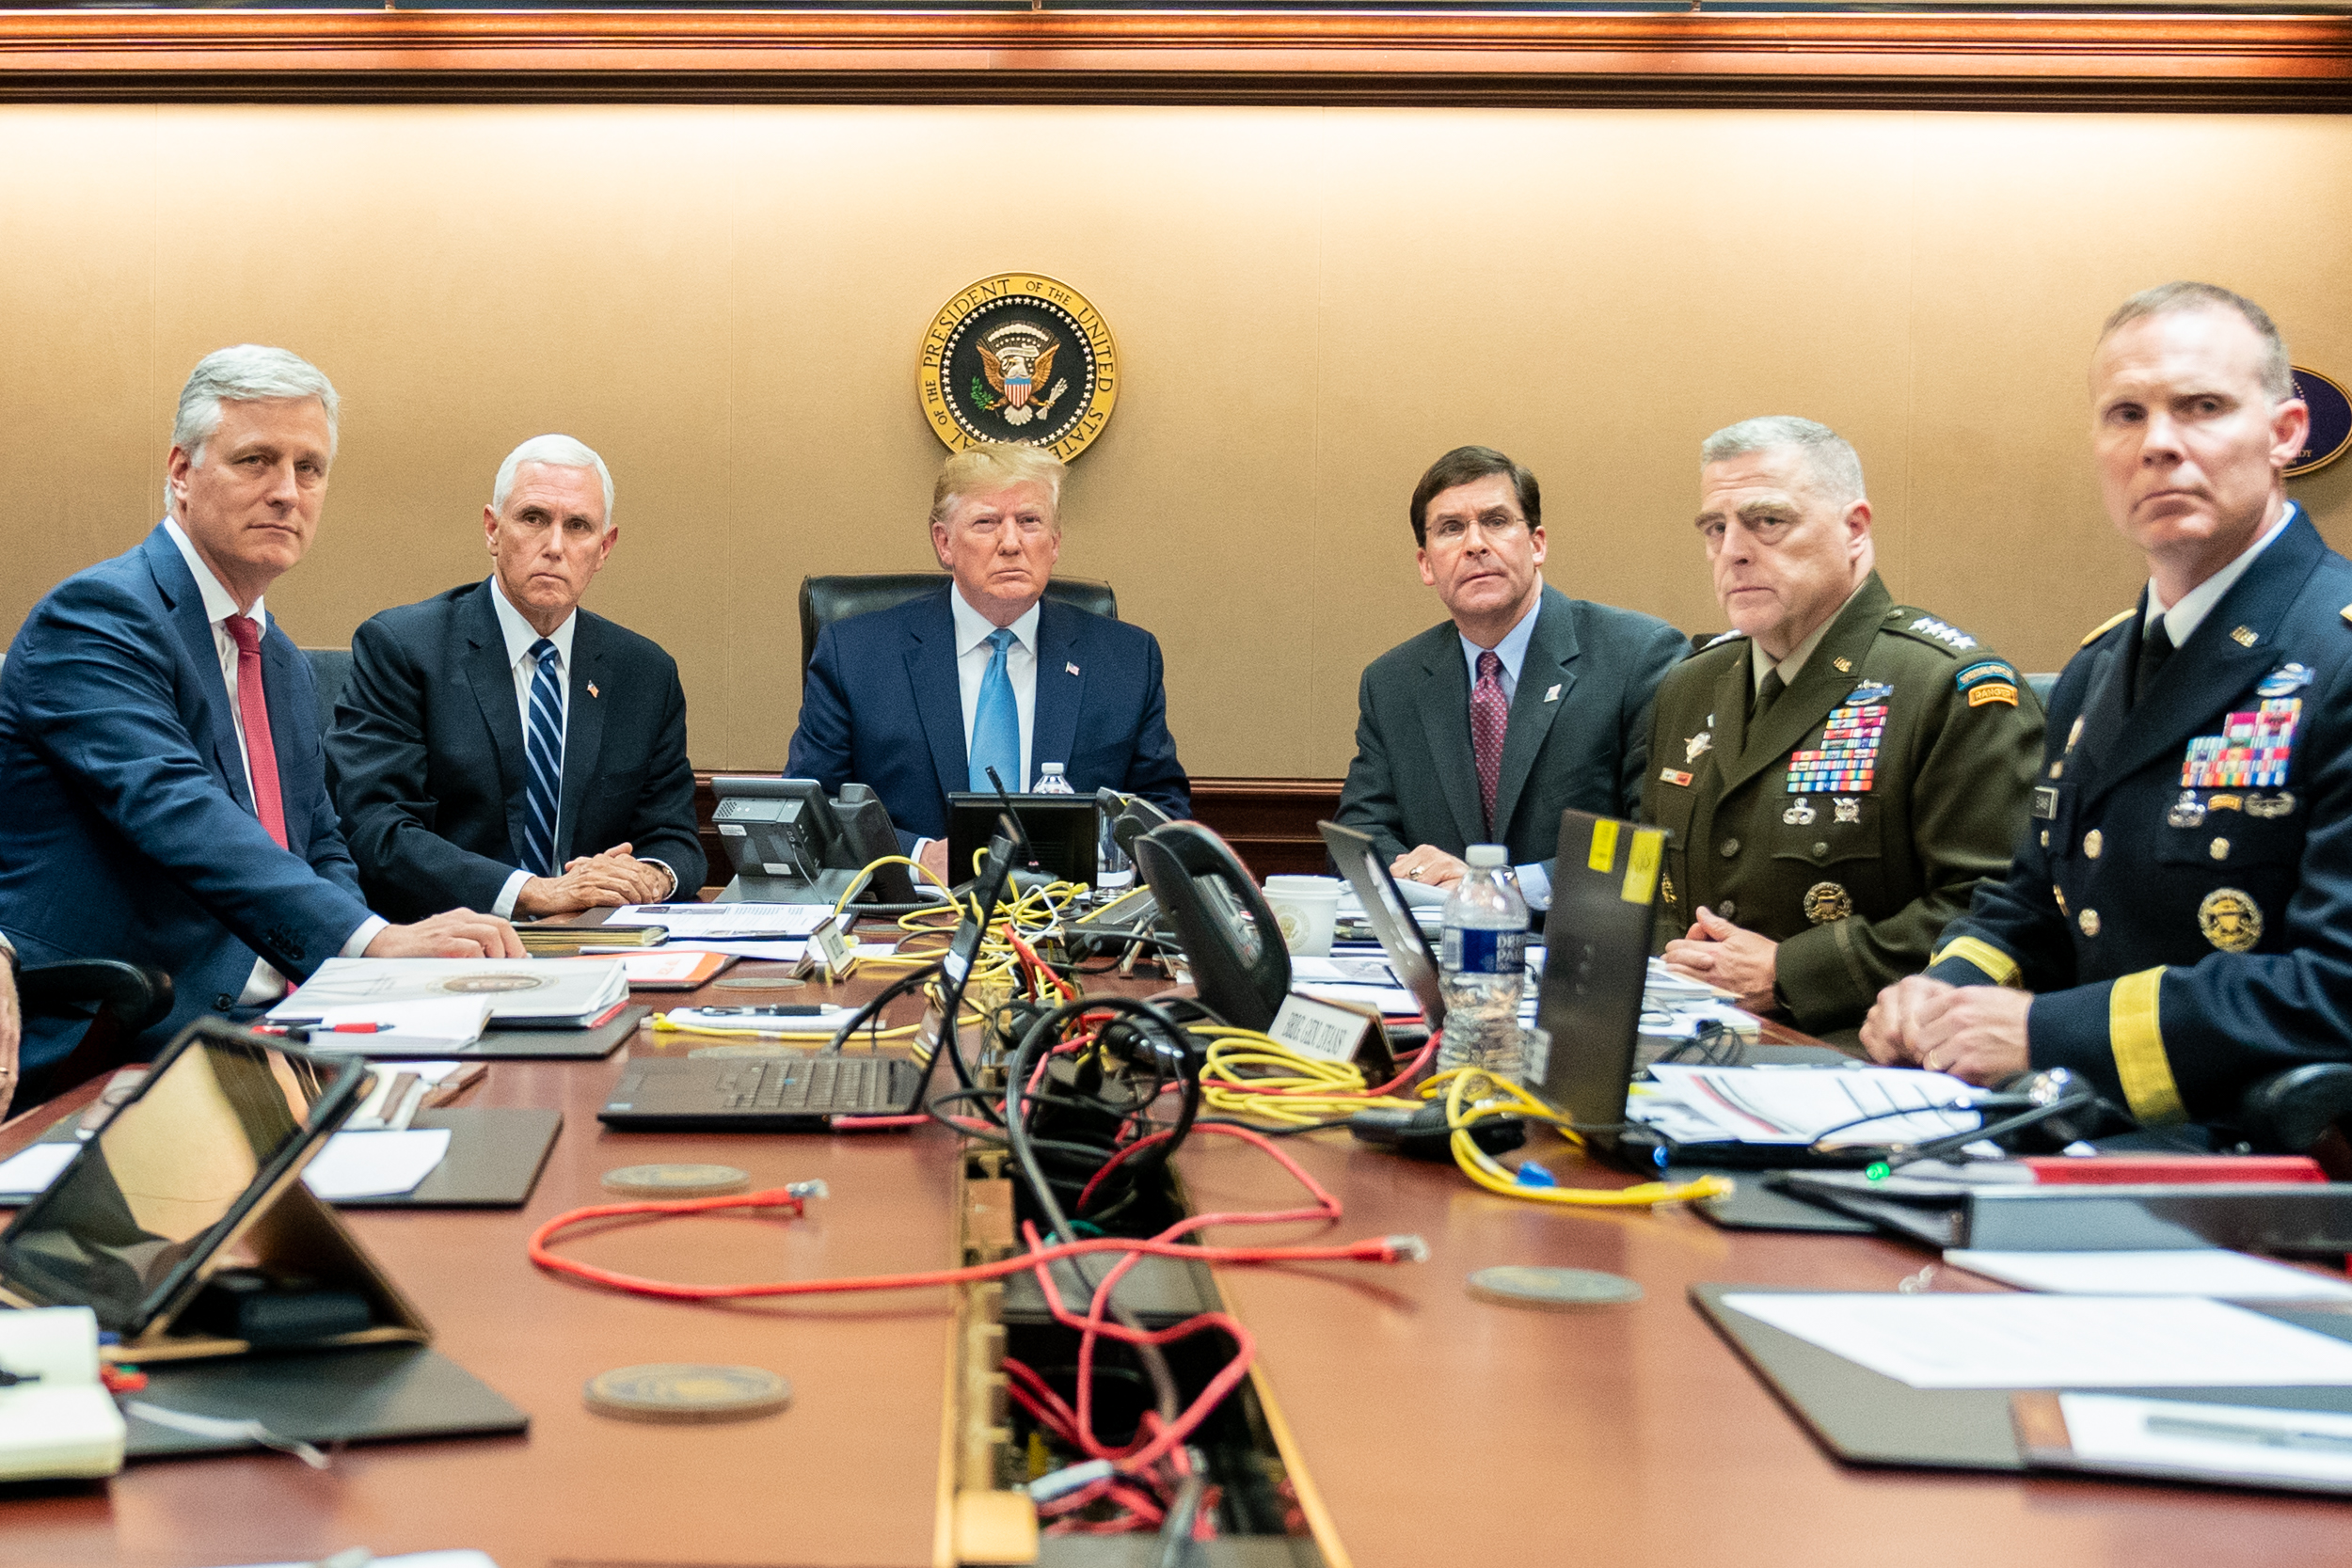 The Trump Vs. Obama Situation Room Photos